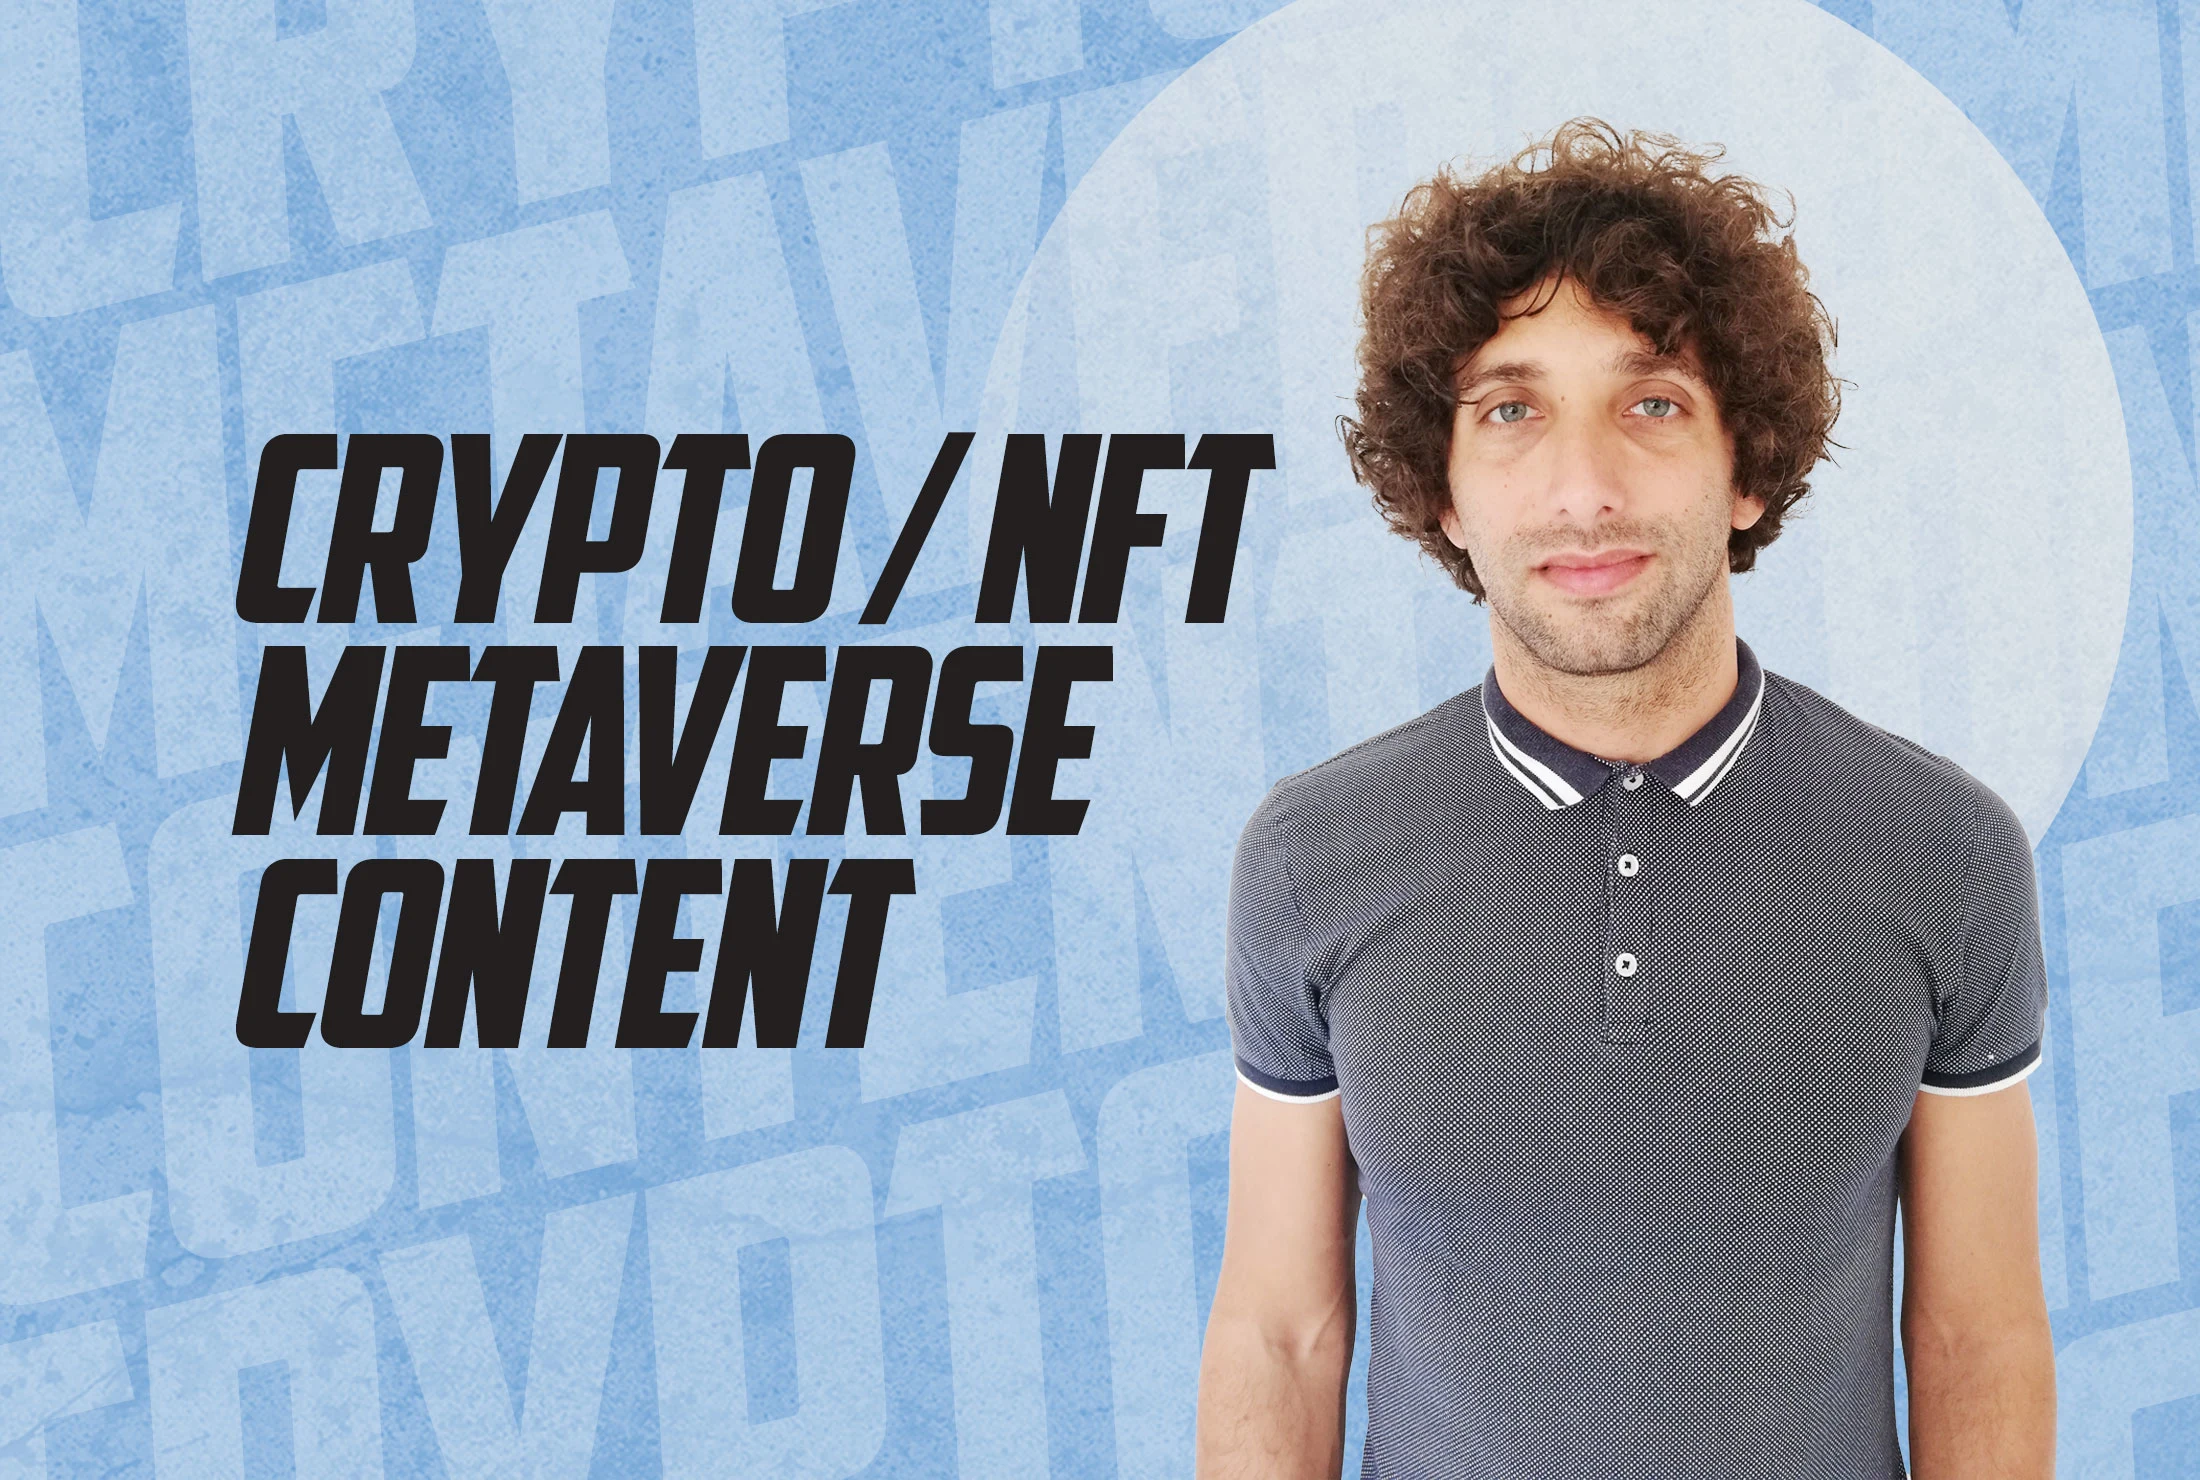 I will be your nft, metaverse and crypto content writer